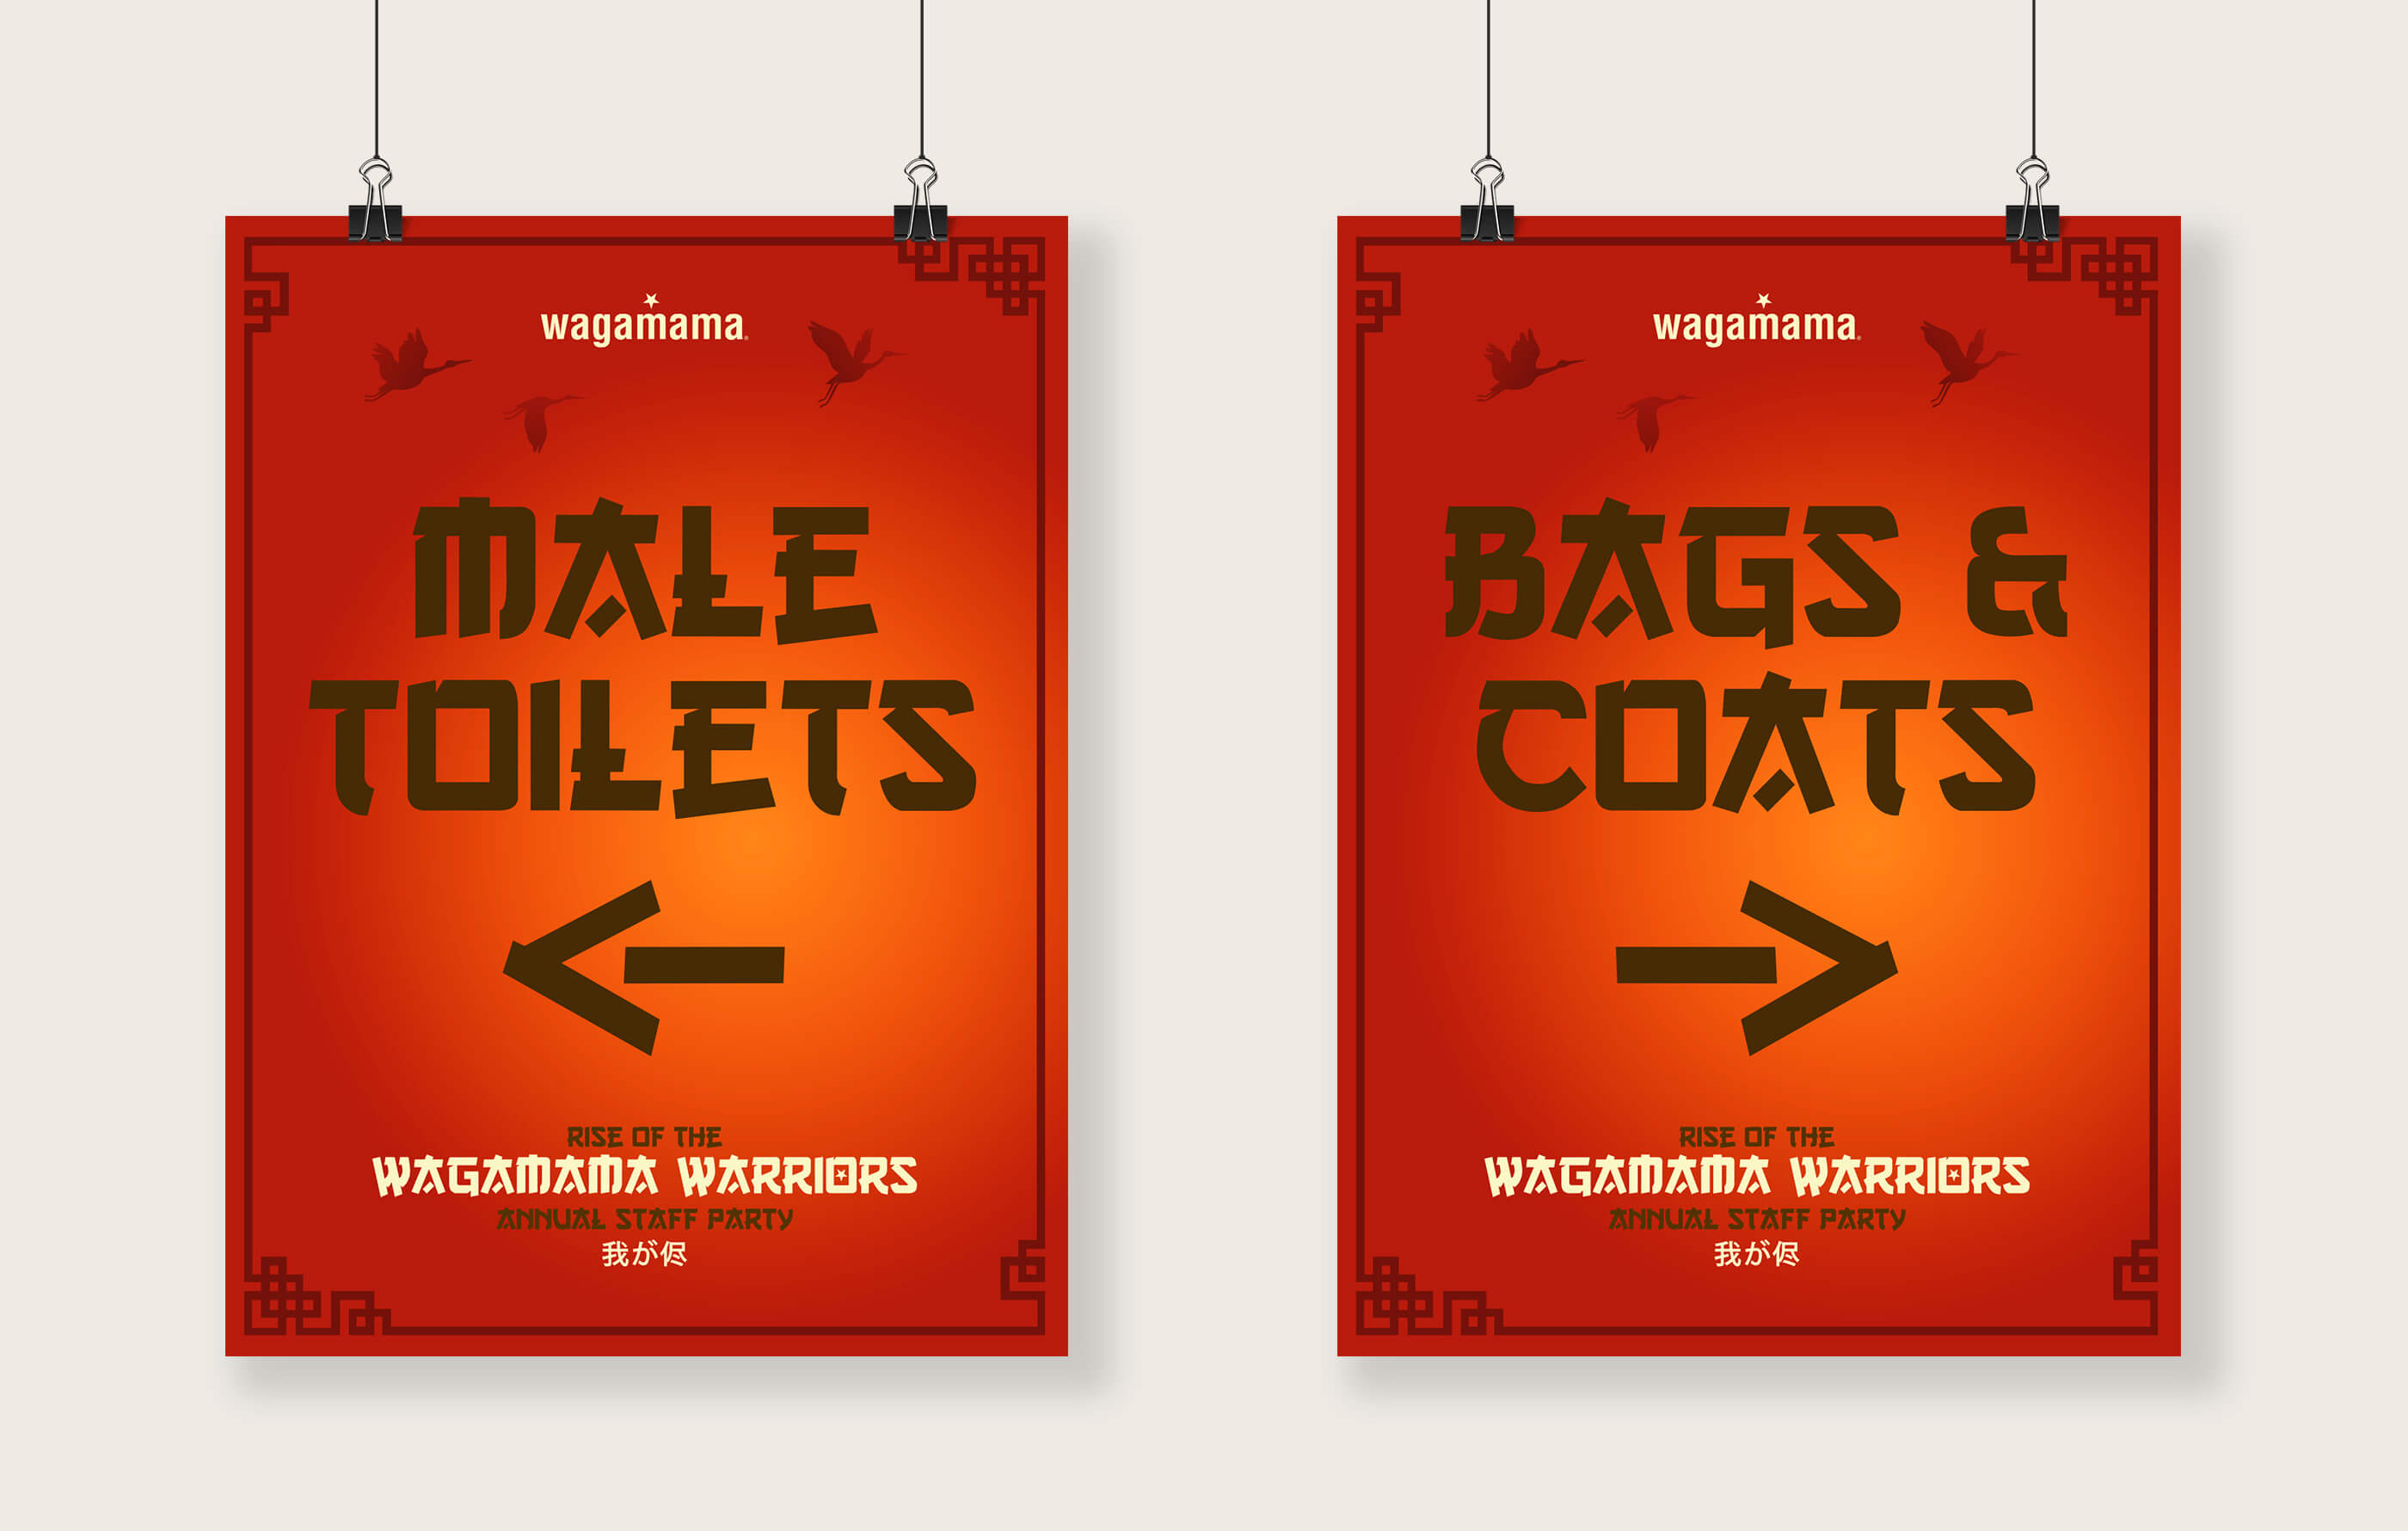 Two Wagamama signage poster designs, indicating the direction of the male toilets and the cloakroom on a deep red background with crane birds flying above the text